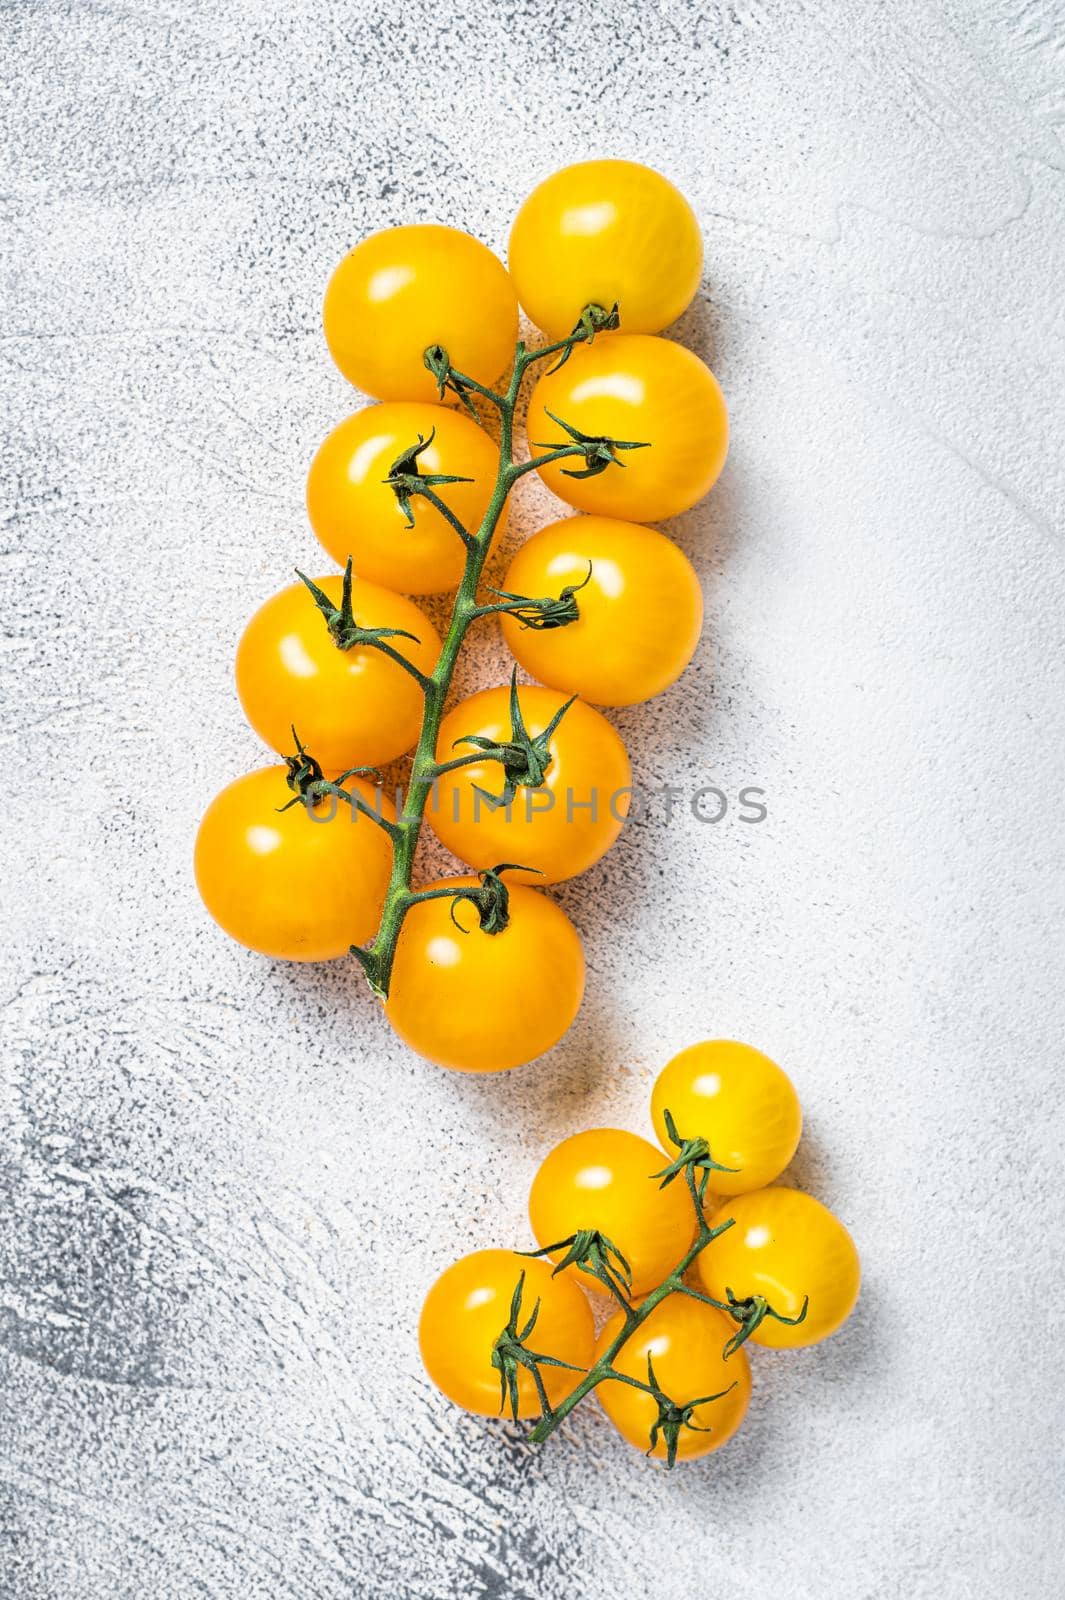 Small yellow cherry tomato on a kitchen table. White background. Top view by Composter